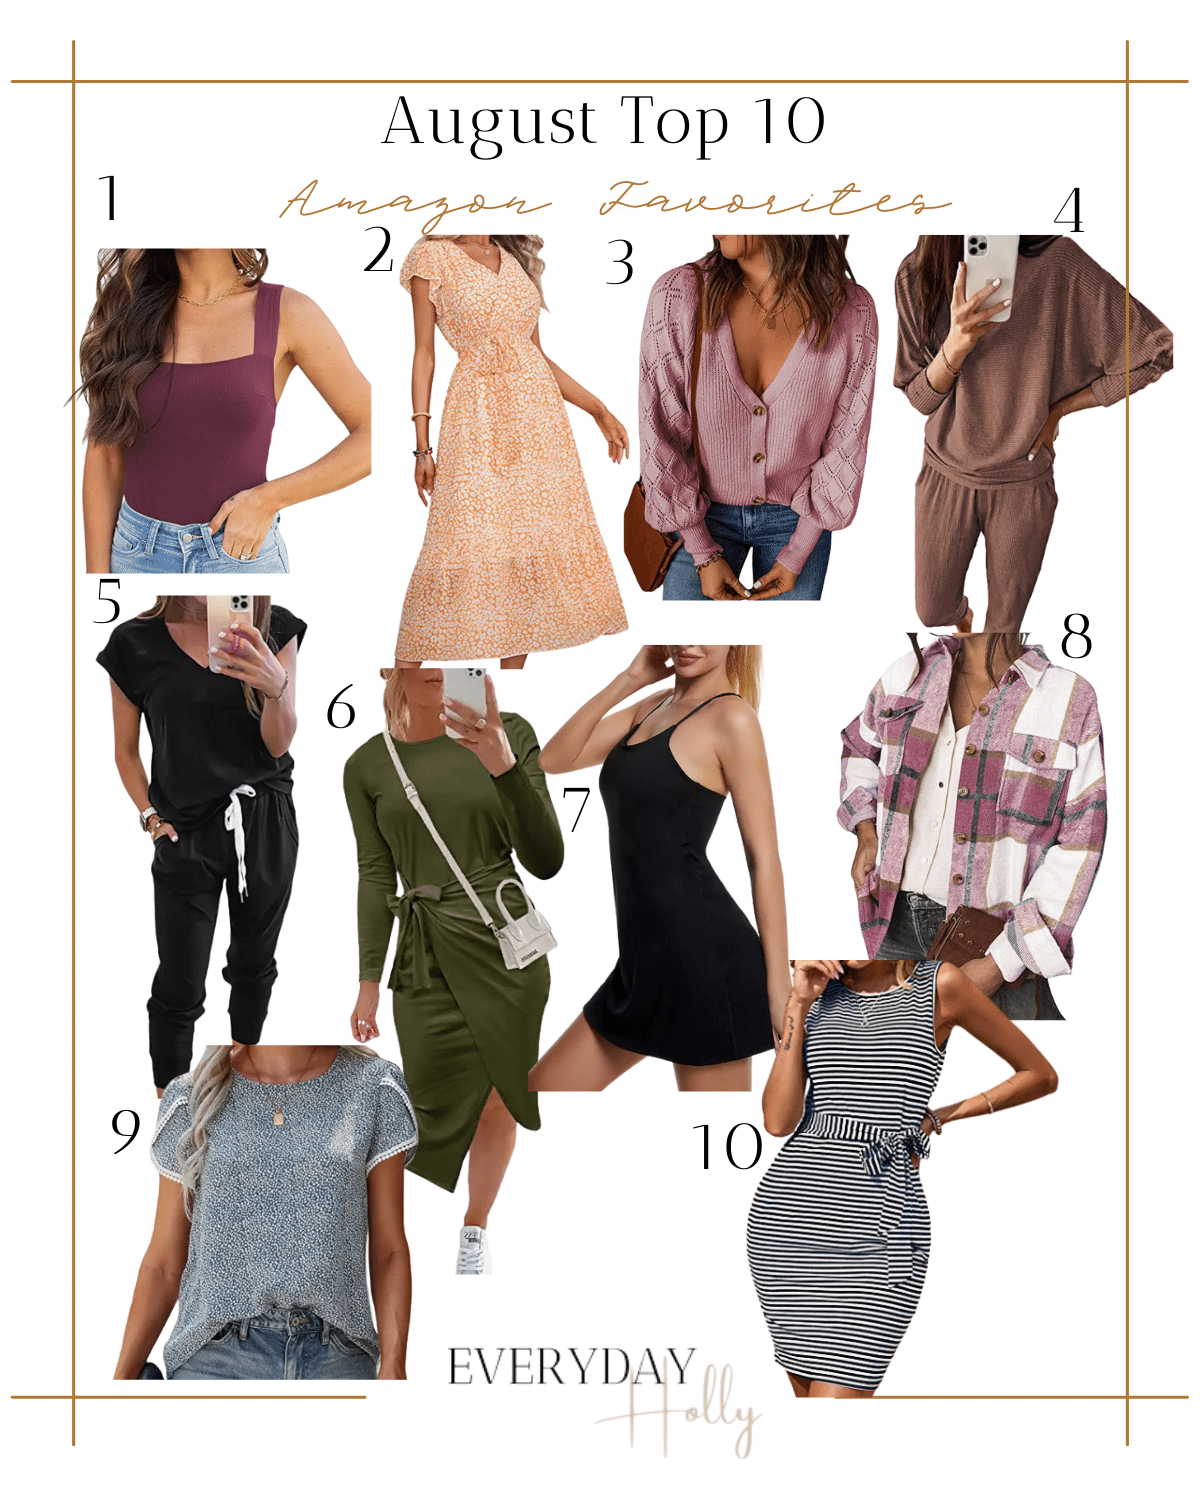 Amazon Fashion | August Top Sellers

#august #augusttopsellers #topsellers #amazon #amazonfinds #amazonfavorites #amazonbeauty #amazonfashion #amazonhome  #bodysuit #stripedress #shacket #flannel #athleisure #activewear #blouse #twopieceset